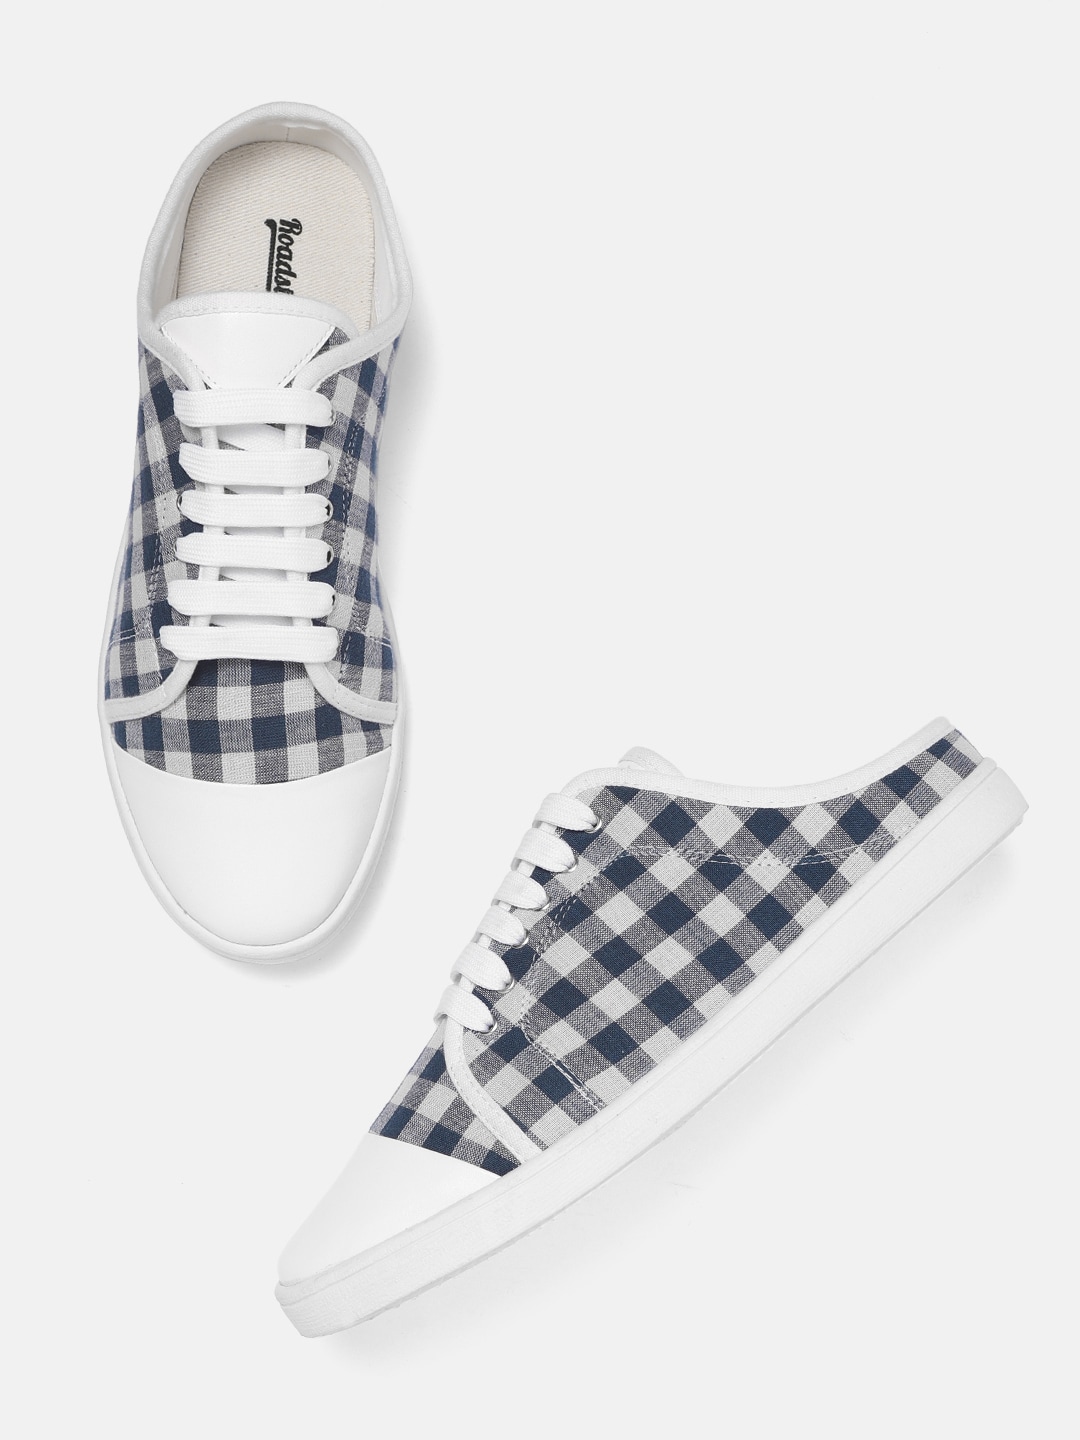 Roadster Women Navy Blue & White Checked Mule Sneakers Price in India